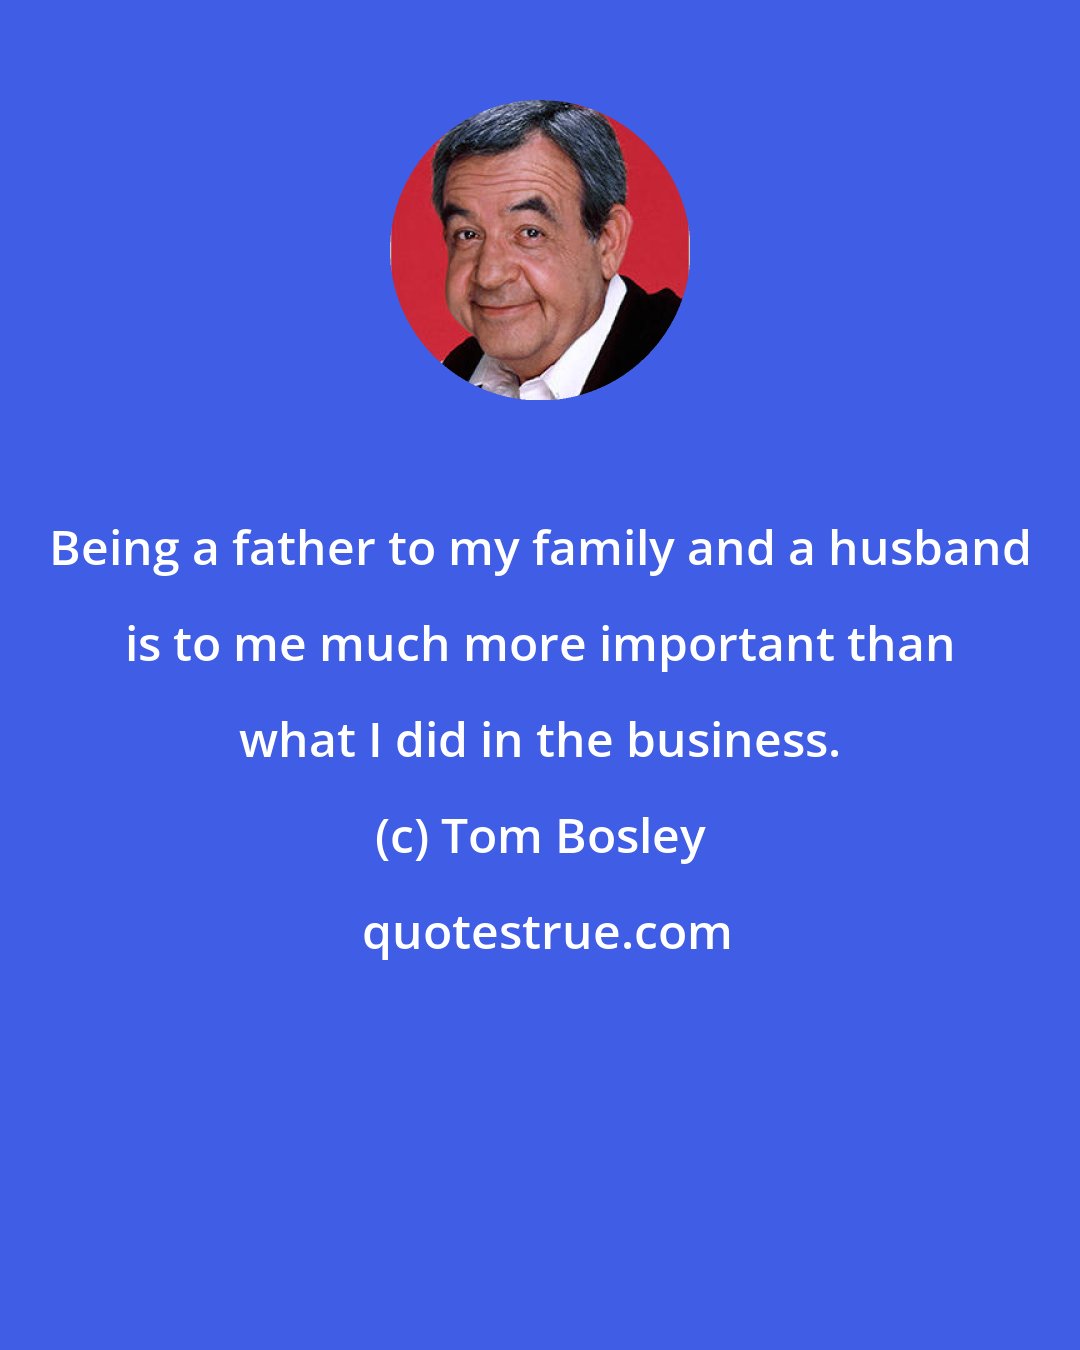 Tom Bosley: Being a father to my family and a husband is to me much more important than what I did in the business.